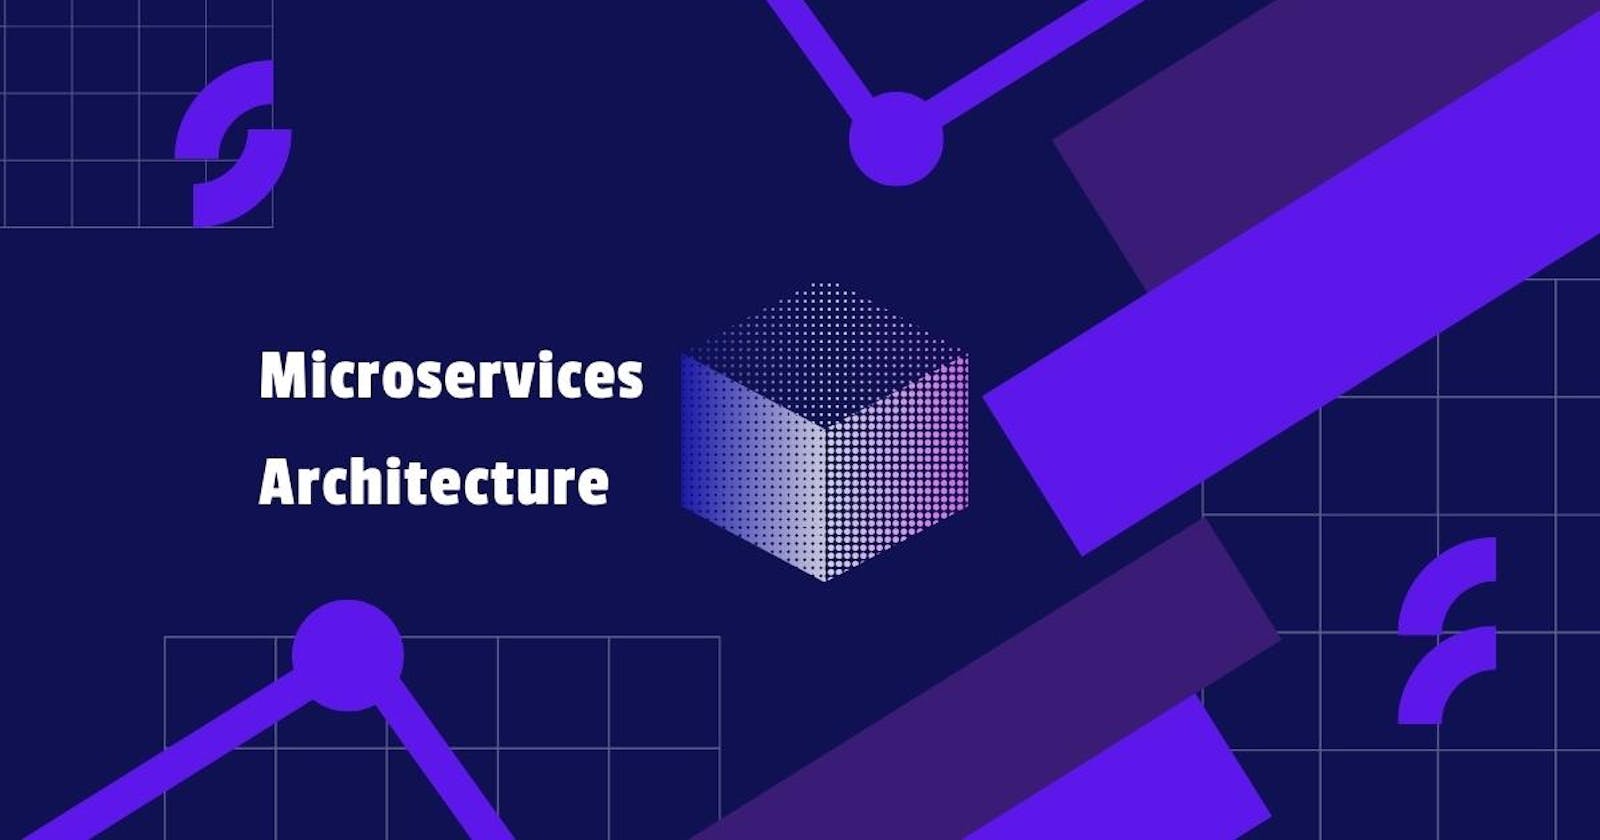 Microservices Architecture: The Outbox Pattern